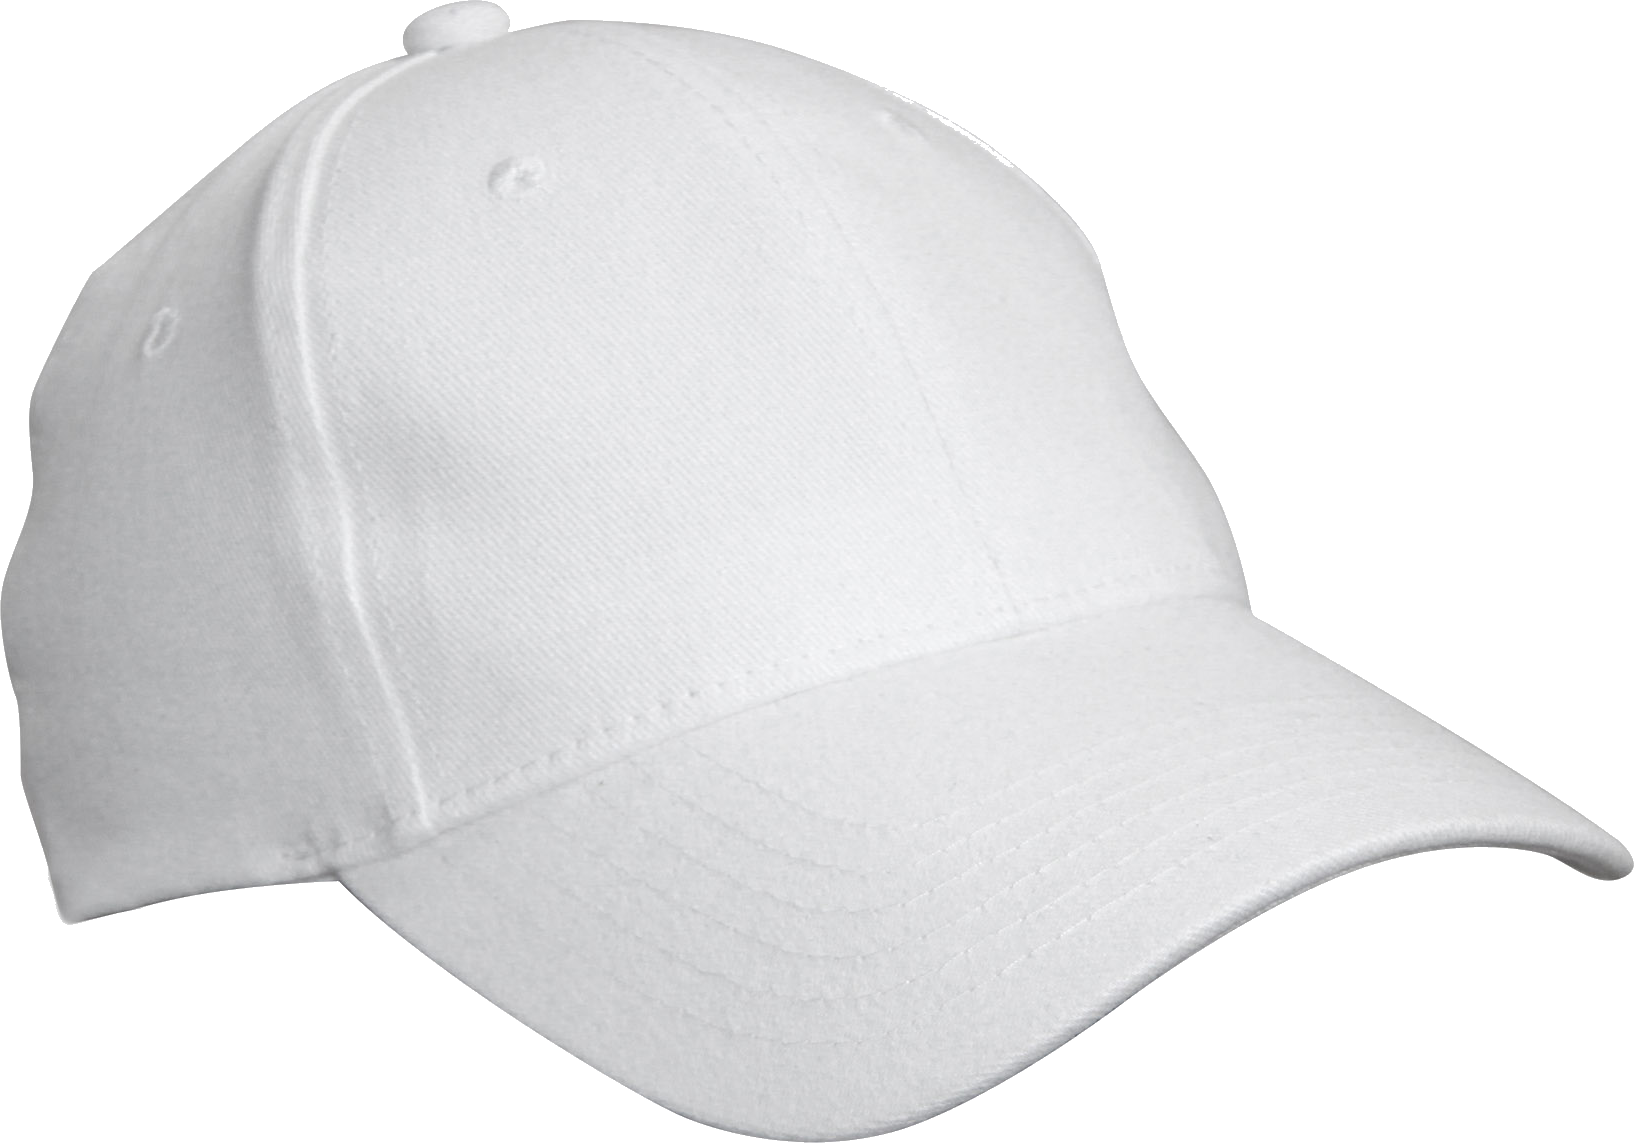 SImple white Cap PNG Image